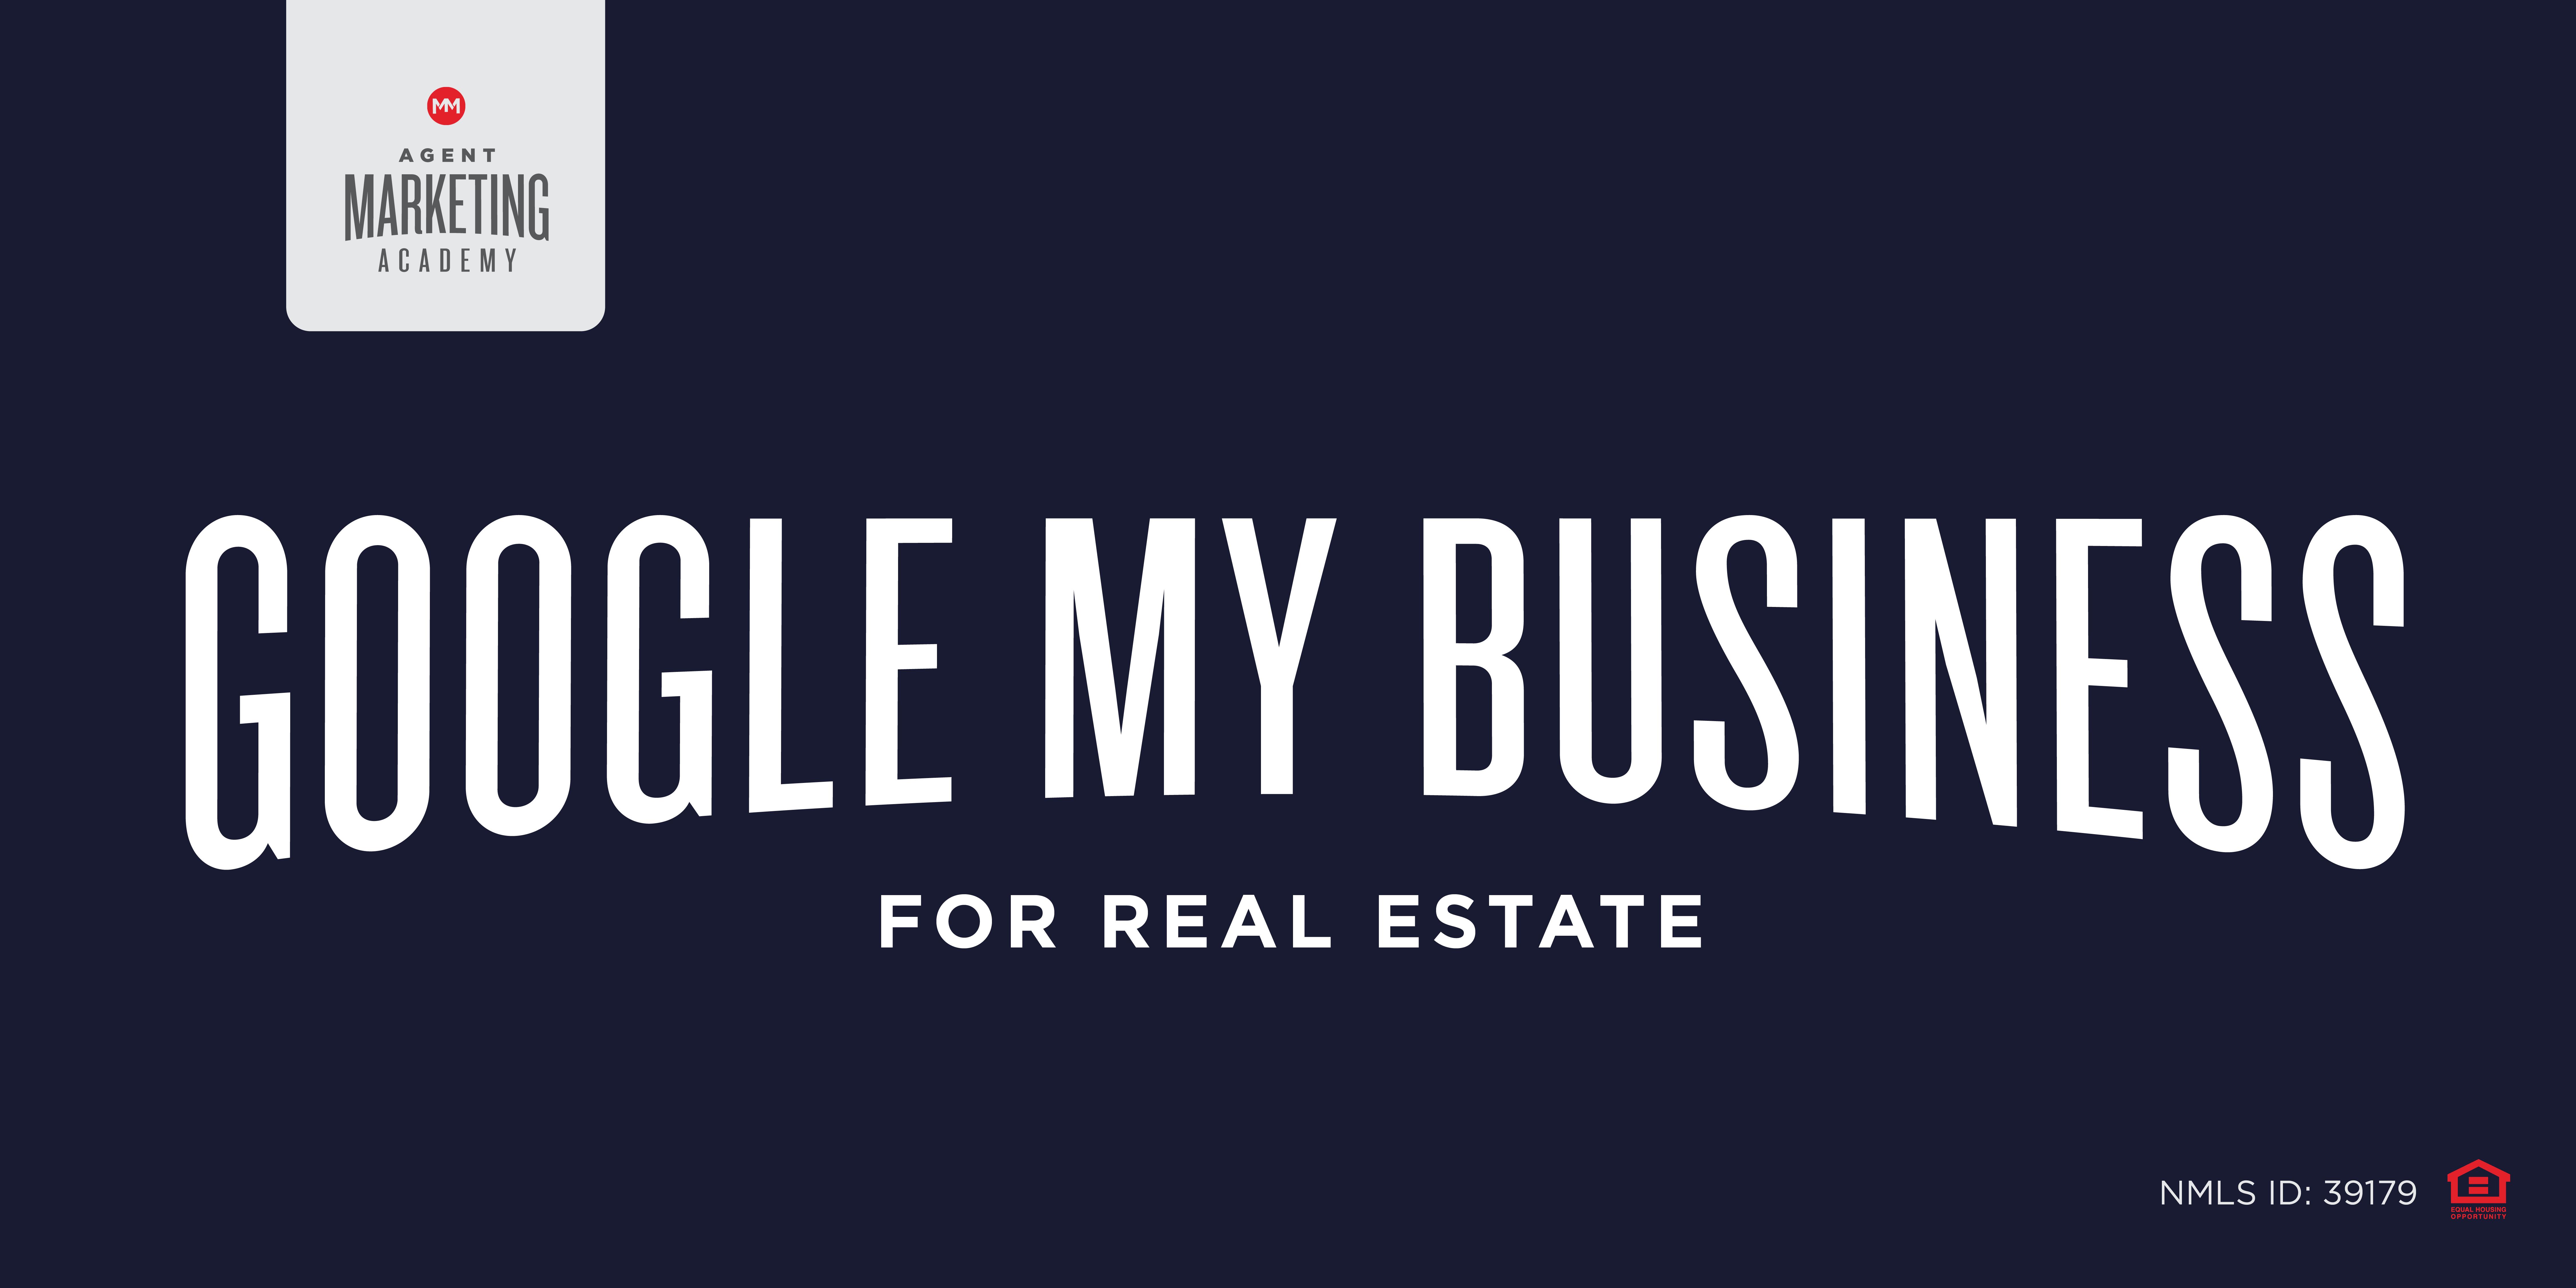 Google My Business for Real Estate